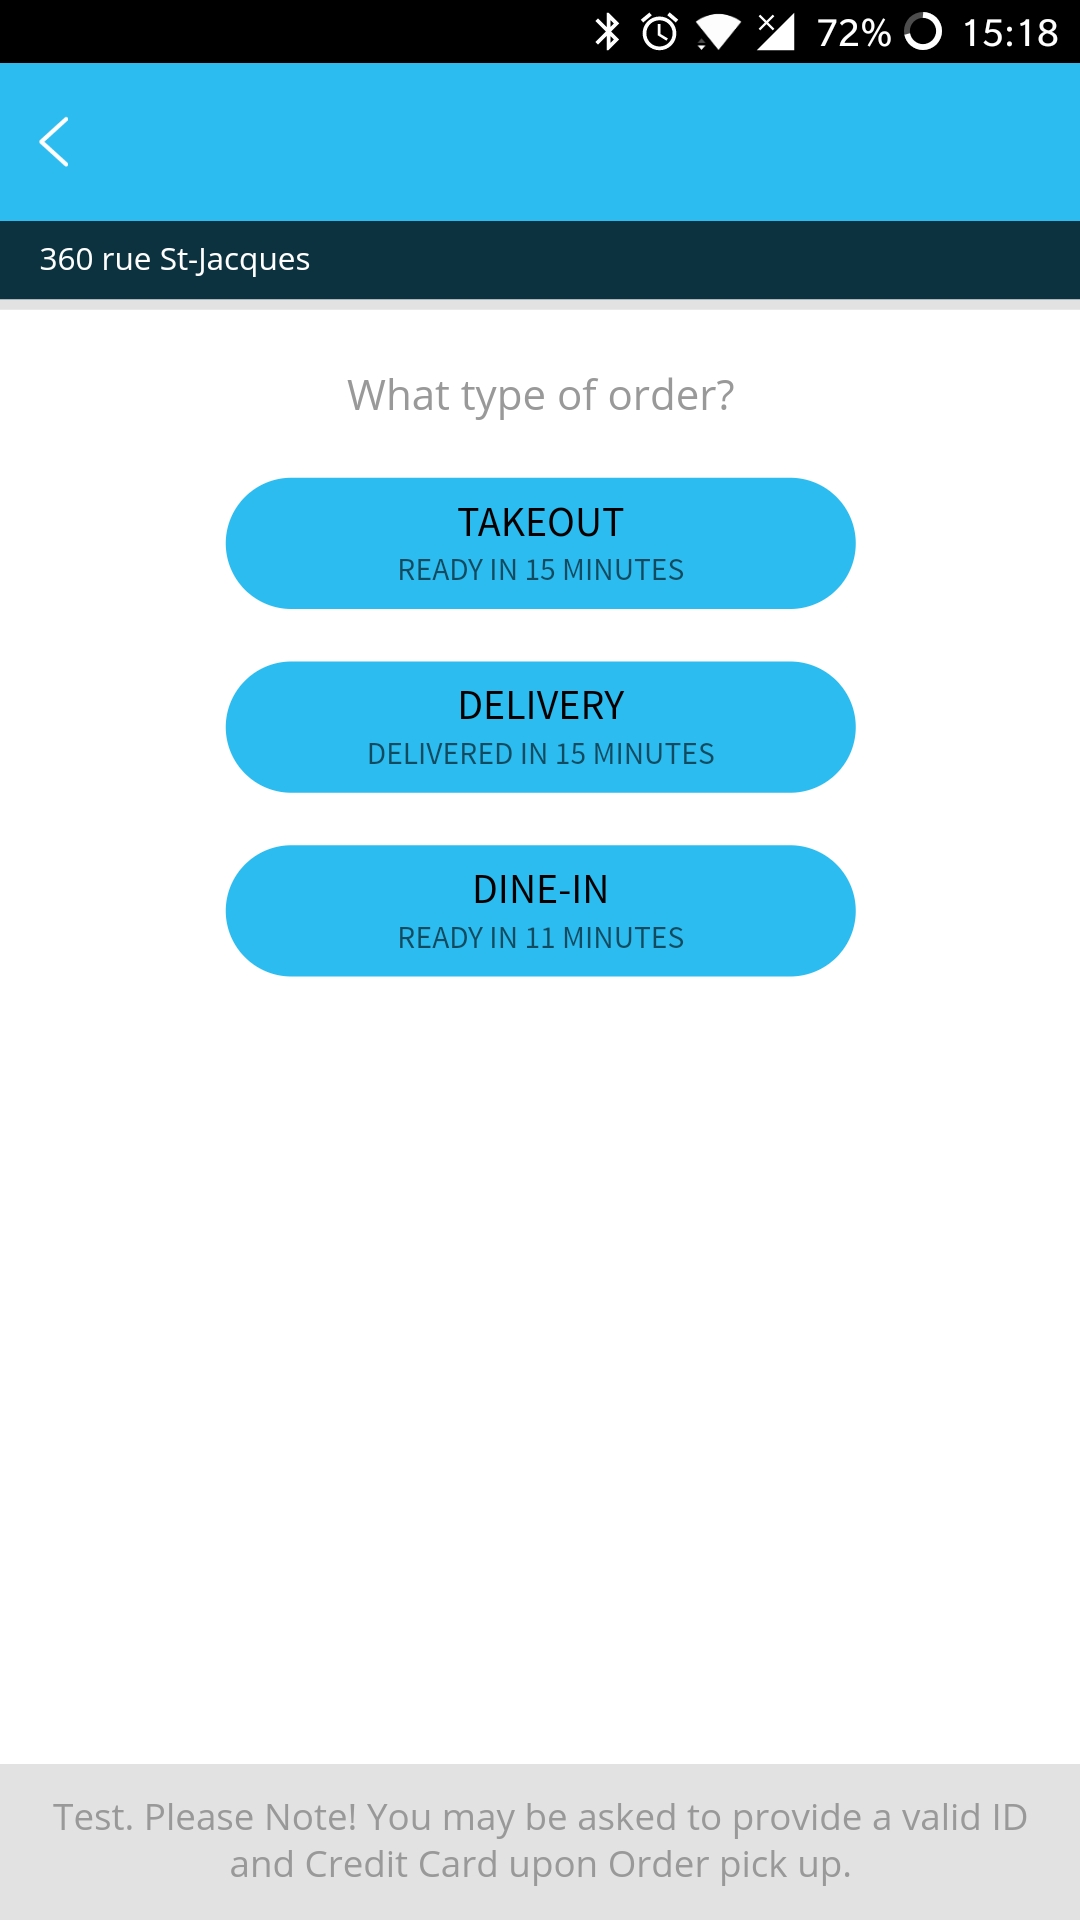 Mobile ordering application